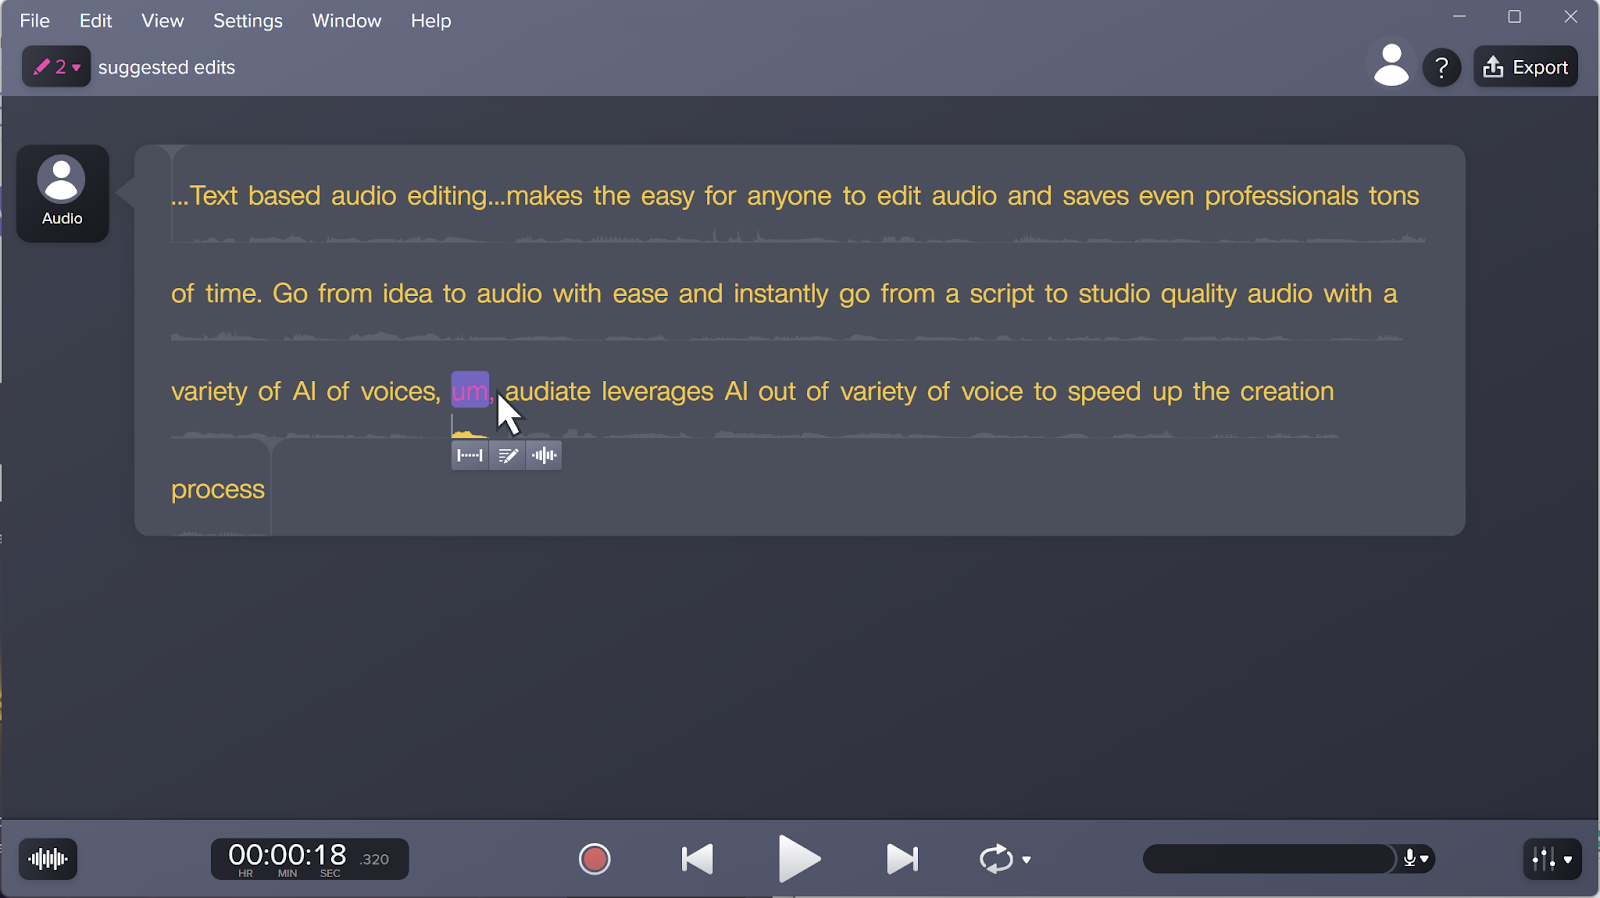 Text-based audio editing shown in the user interface